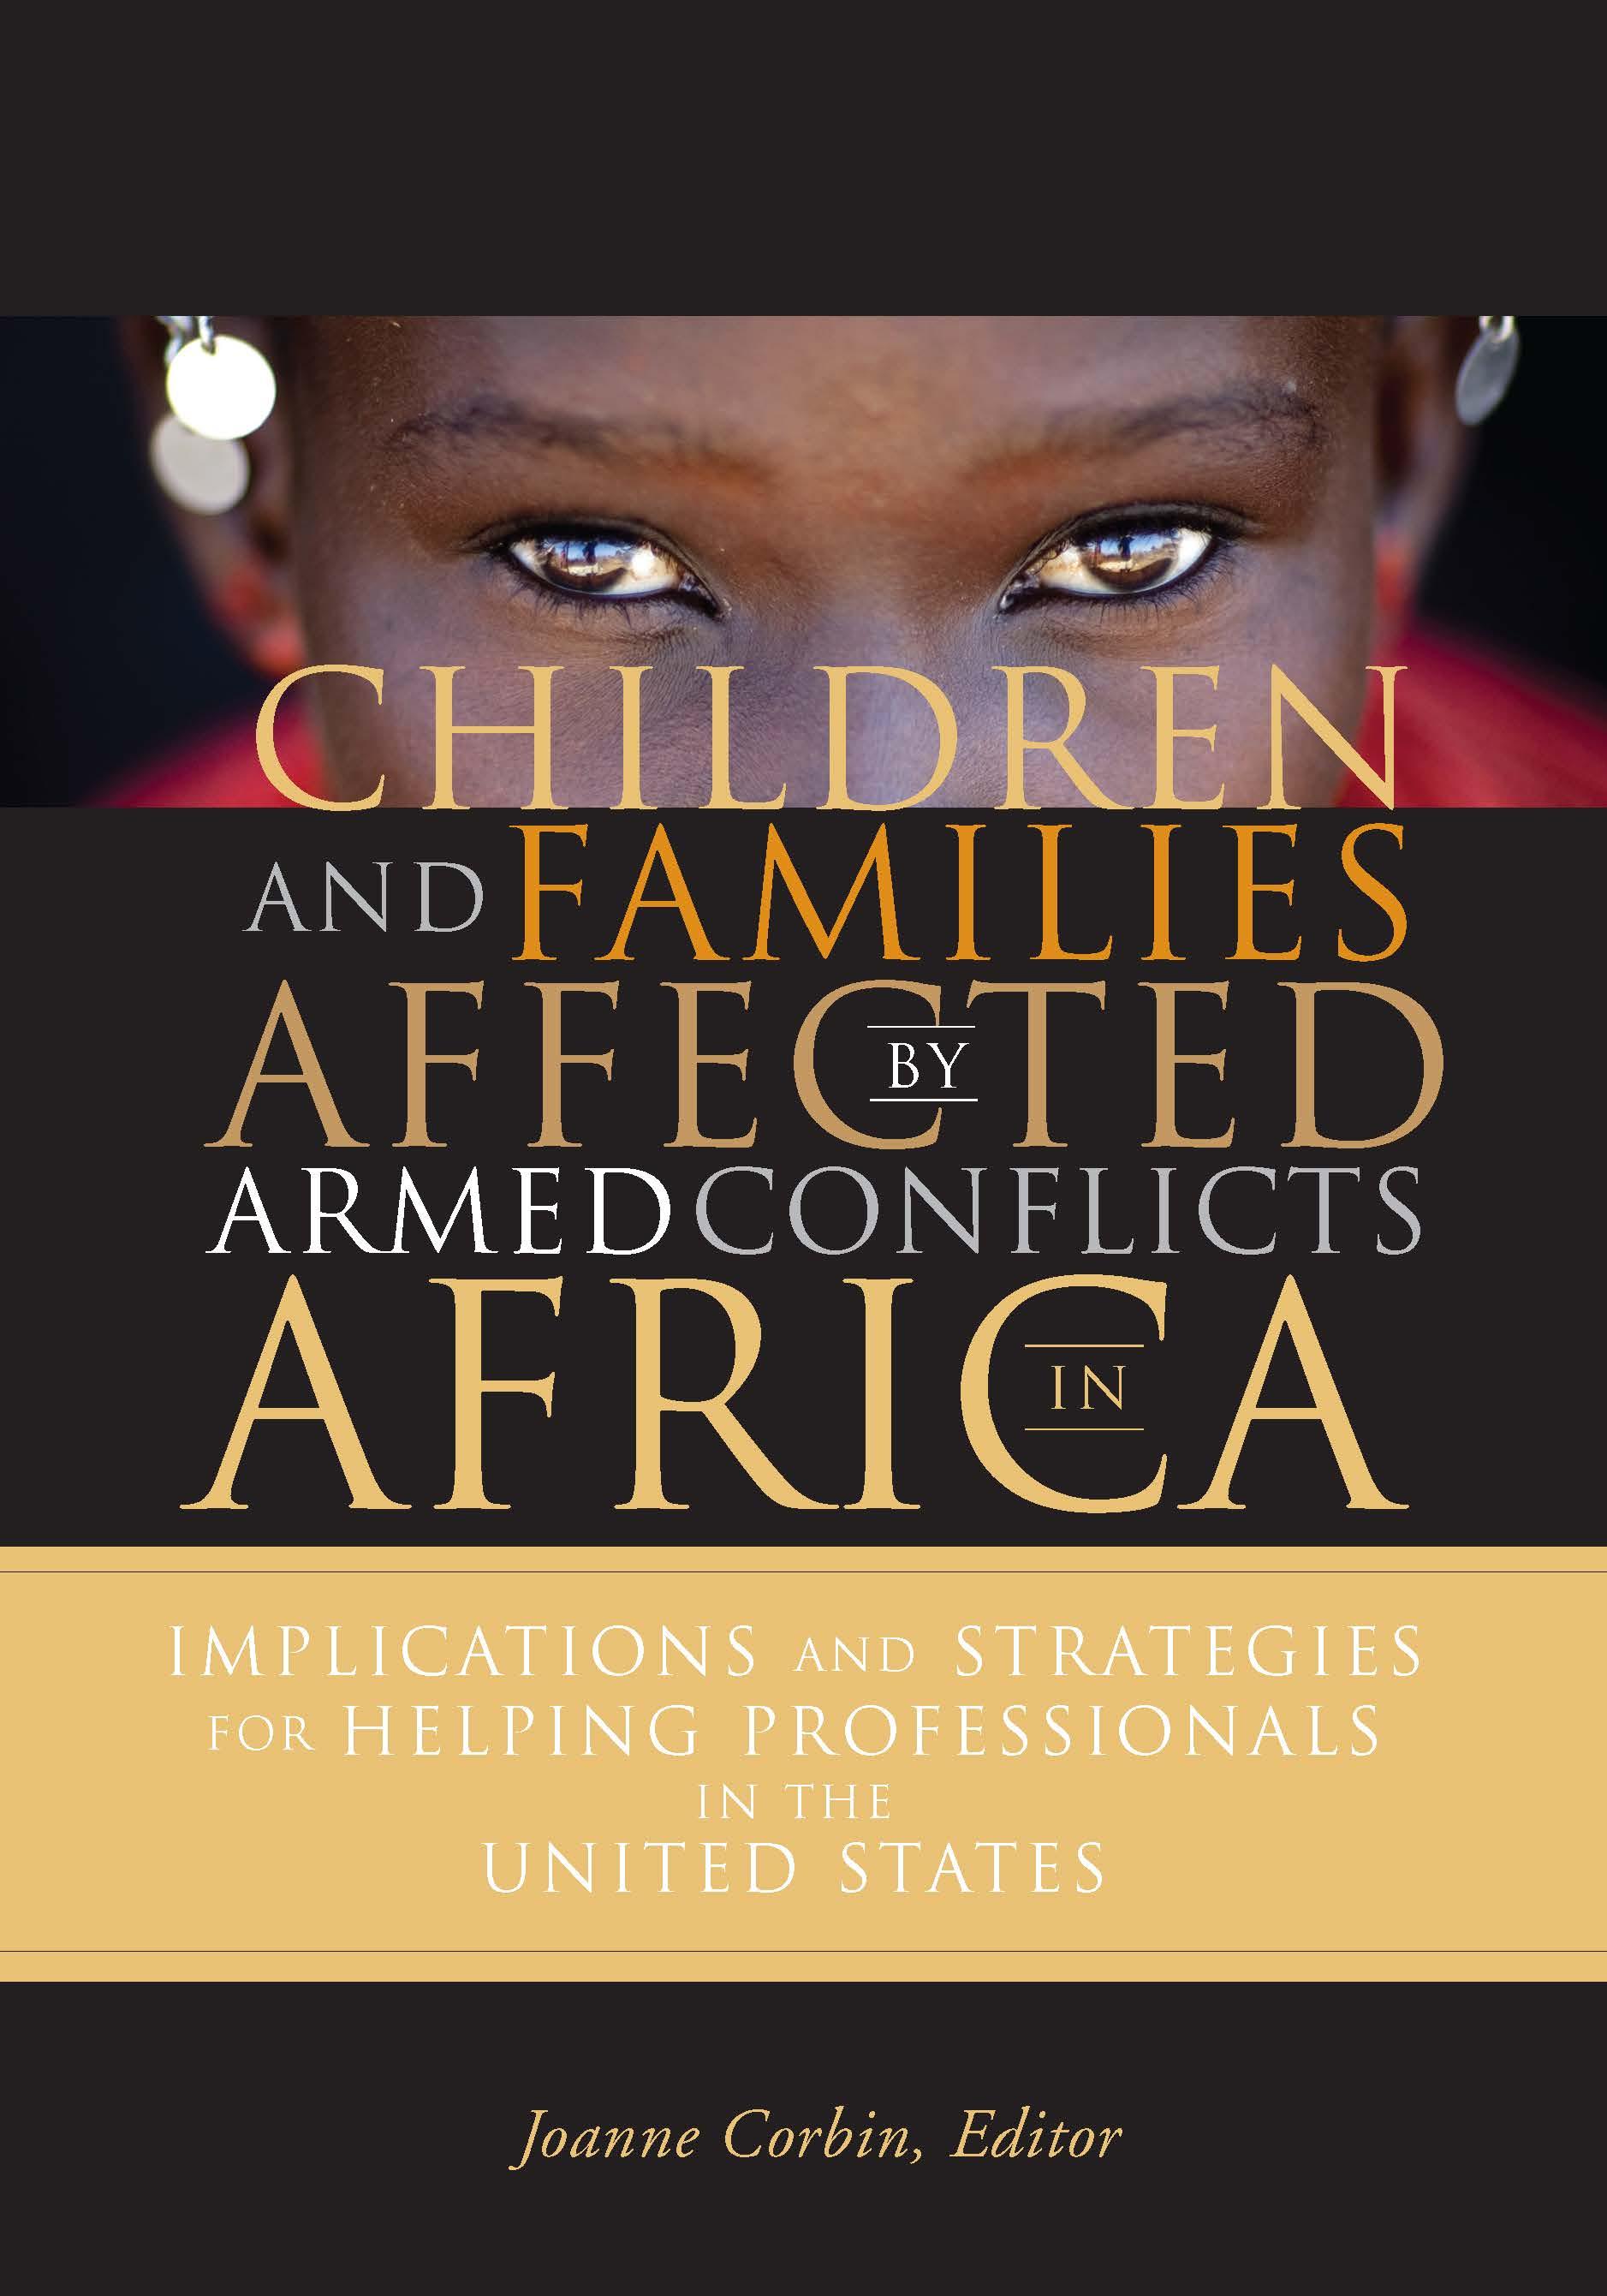 armed conflicts in africa facts